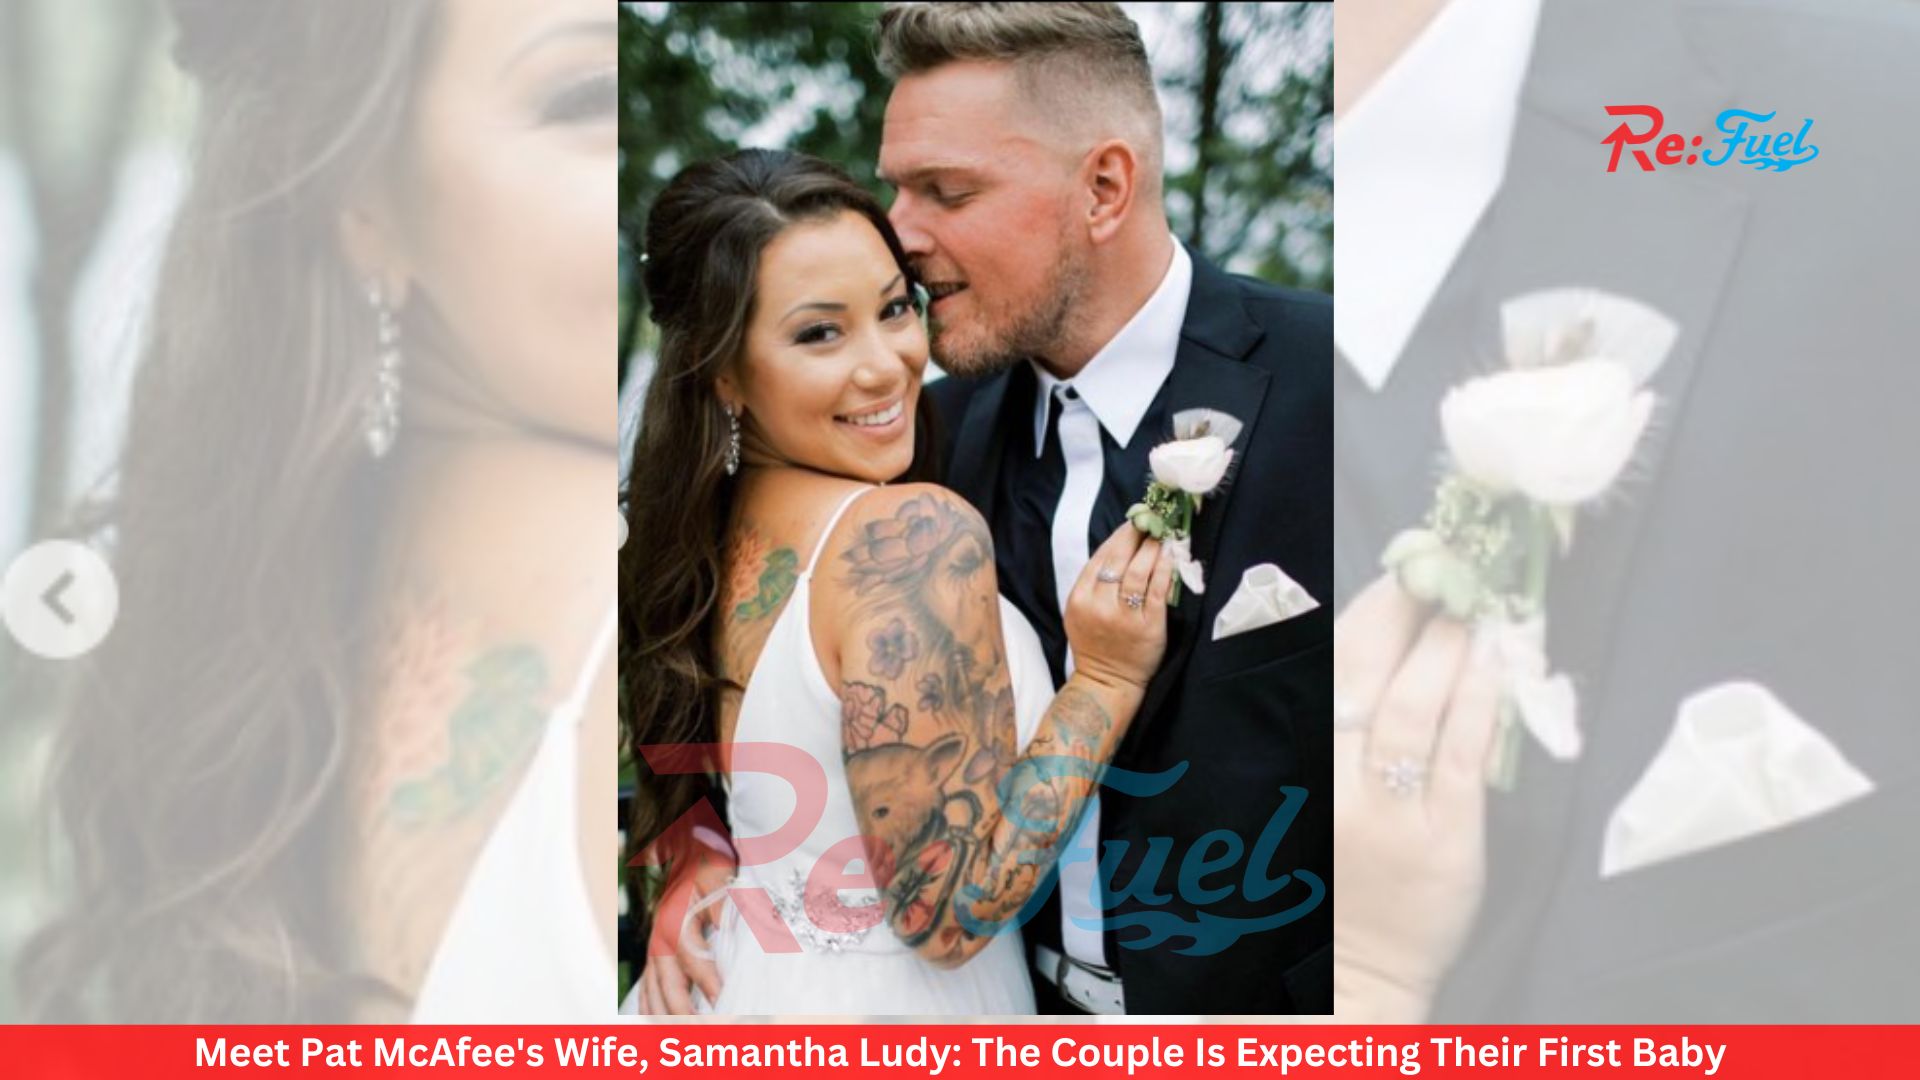 Meet Pat McAfee's Wife, Samantha Ludy: The Couple Is Expecting Their First Baby